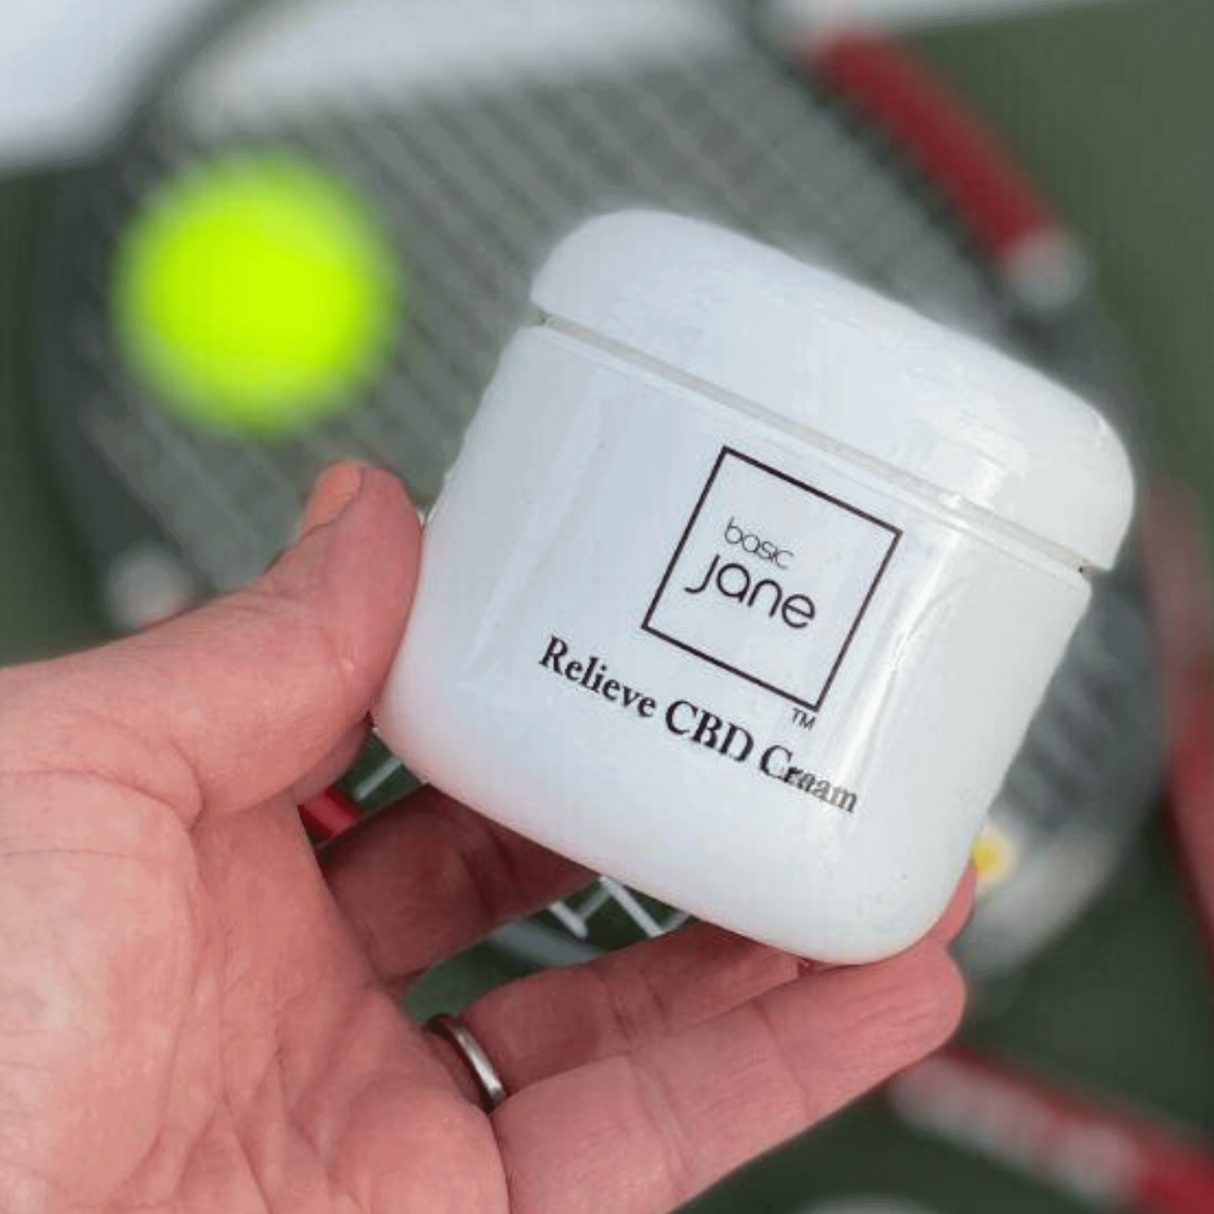 Basic jane cbd is the best cbd product for tennis and golf